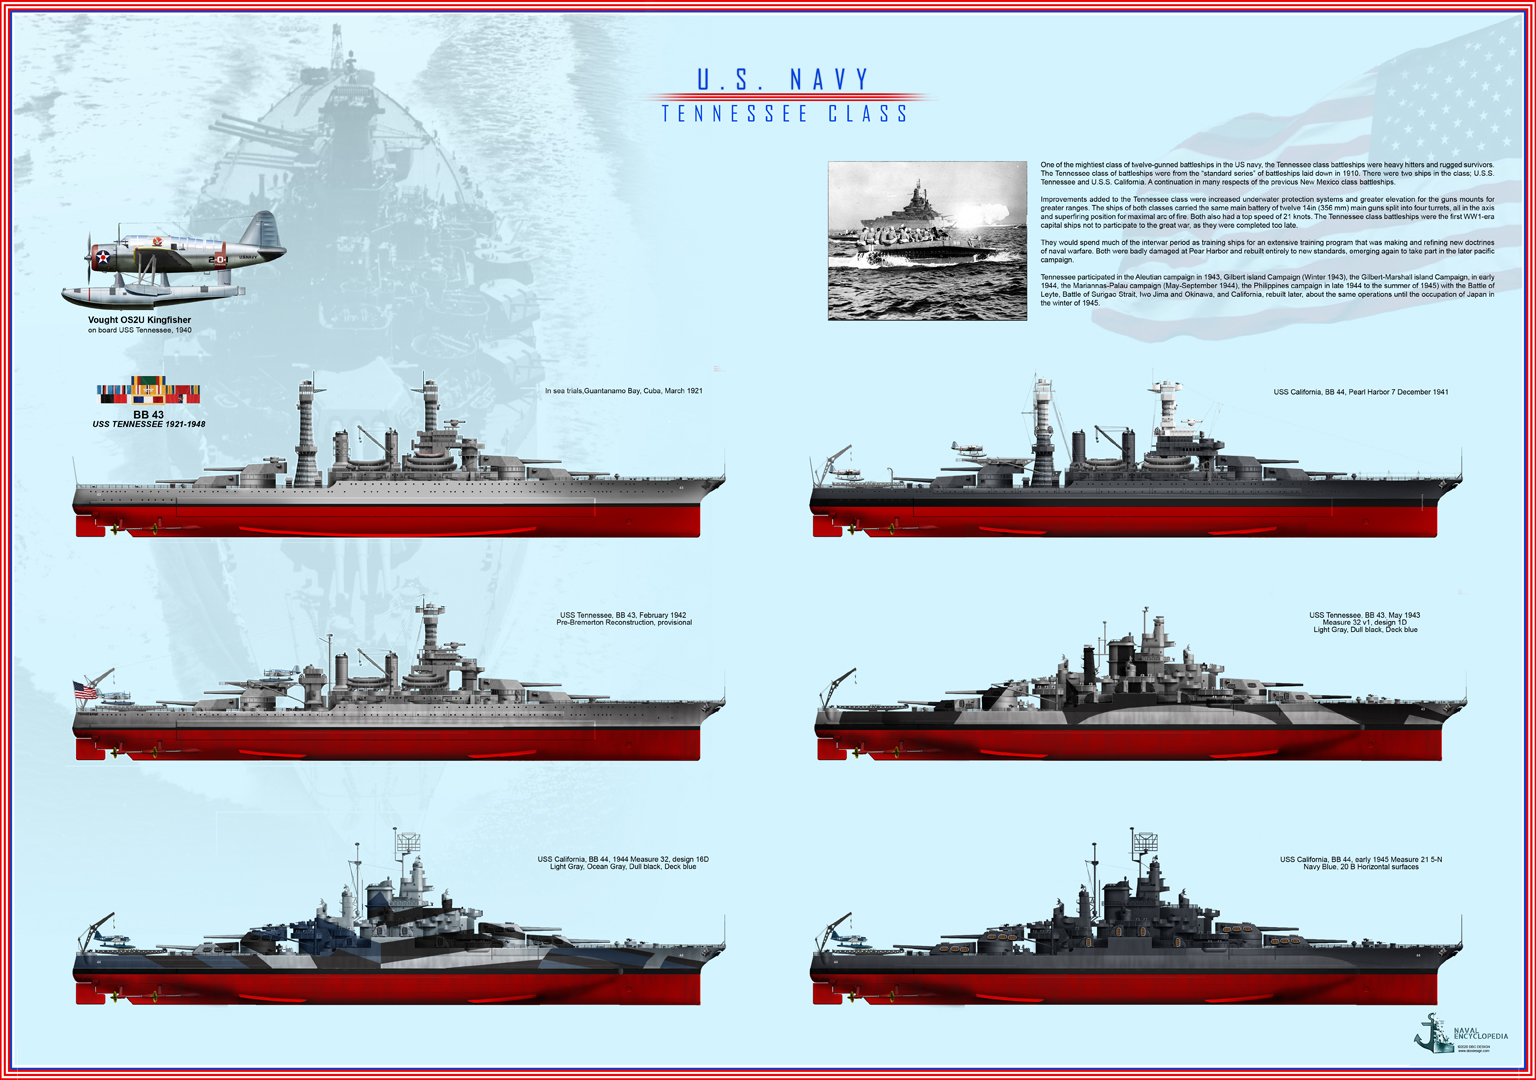 The Tennessee class battleships, evolution and camouflage